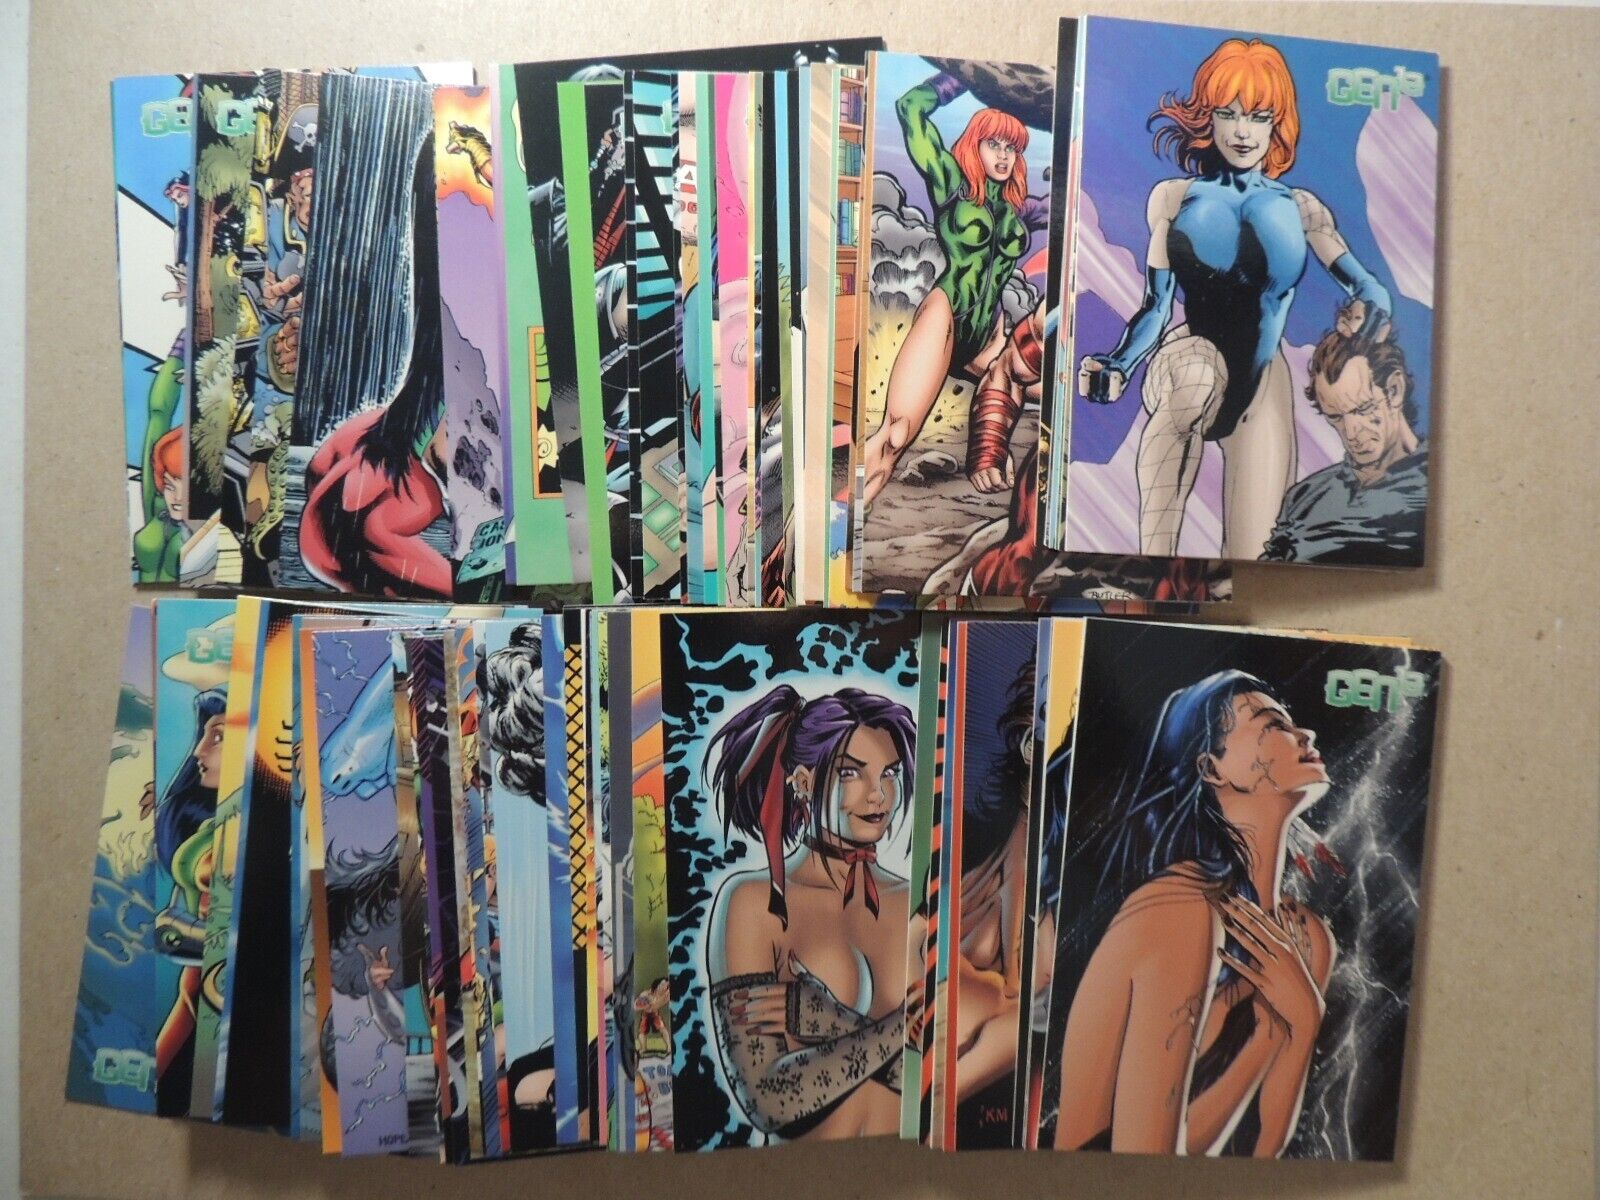 GEN 13 COMIC BOOK SET OF 90 1996 WILDSTORM PRODUCTIONS NON-SPORT TRADING CARDS